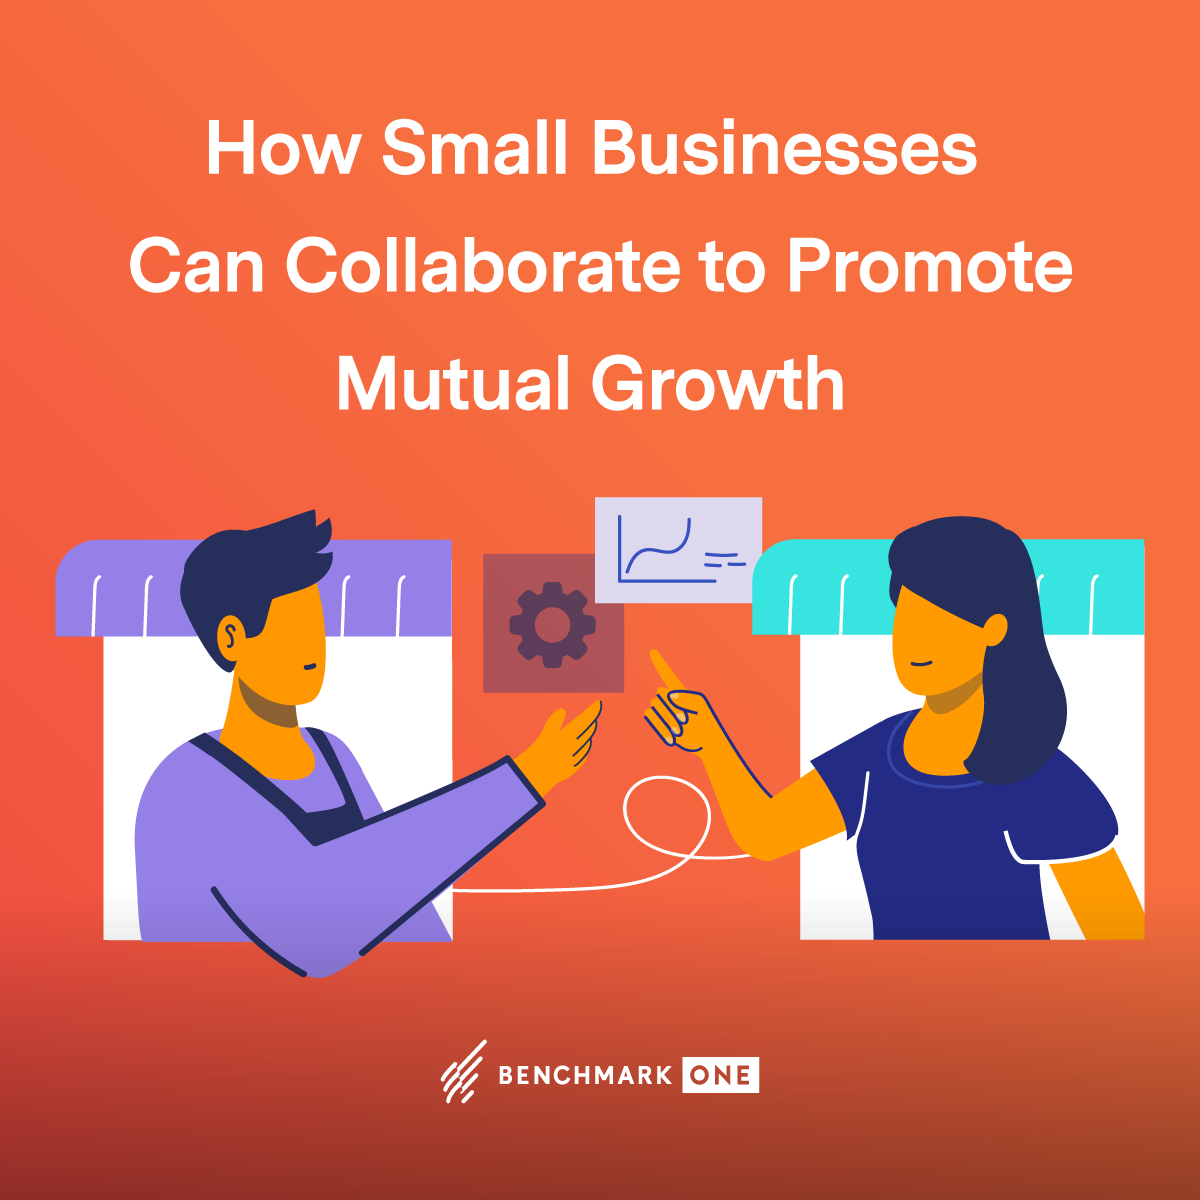 Small businesses collaborate and keep Seven Points alive